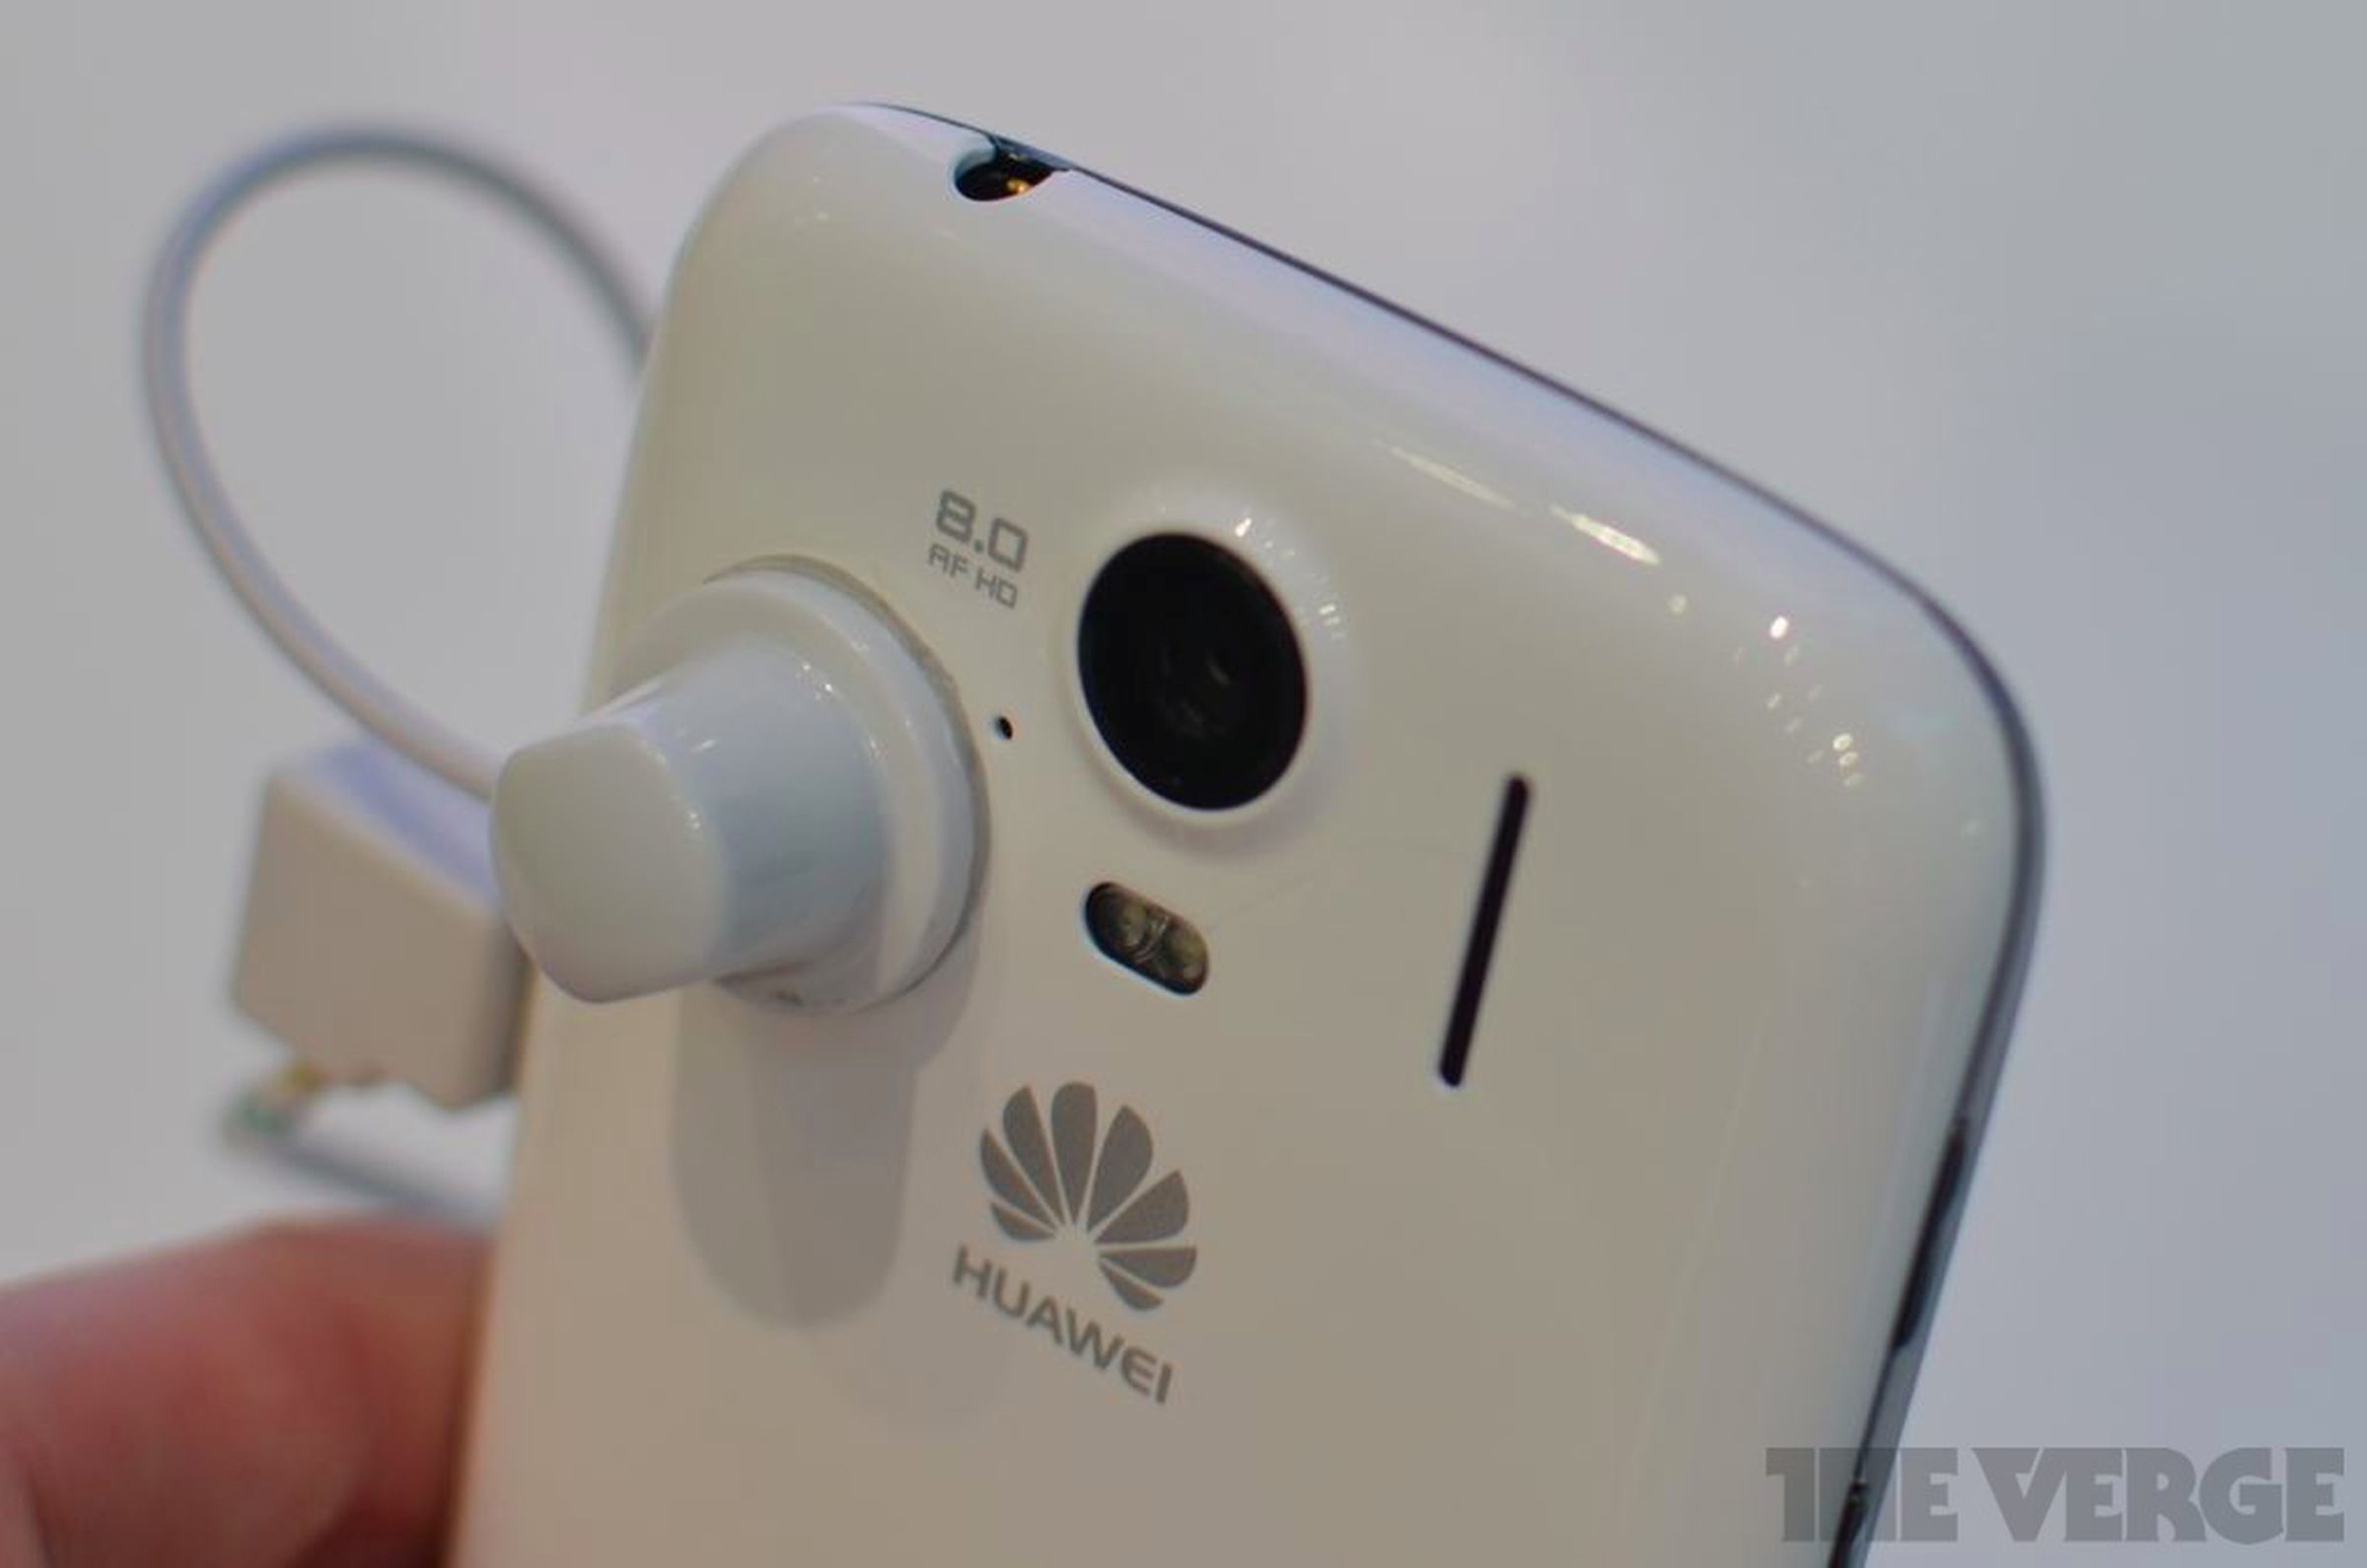 Huawei Ascend P1 lte hands-on pictures